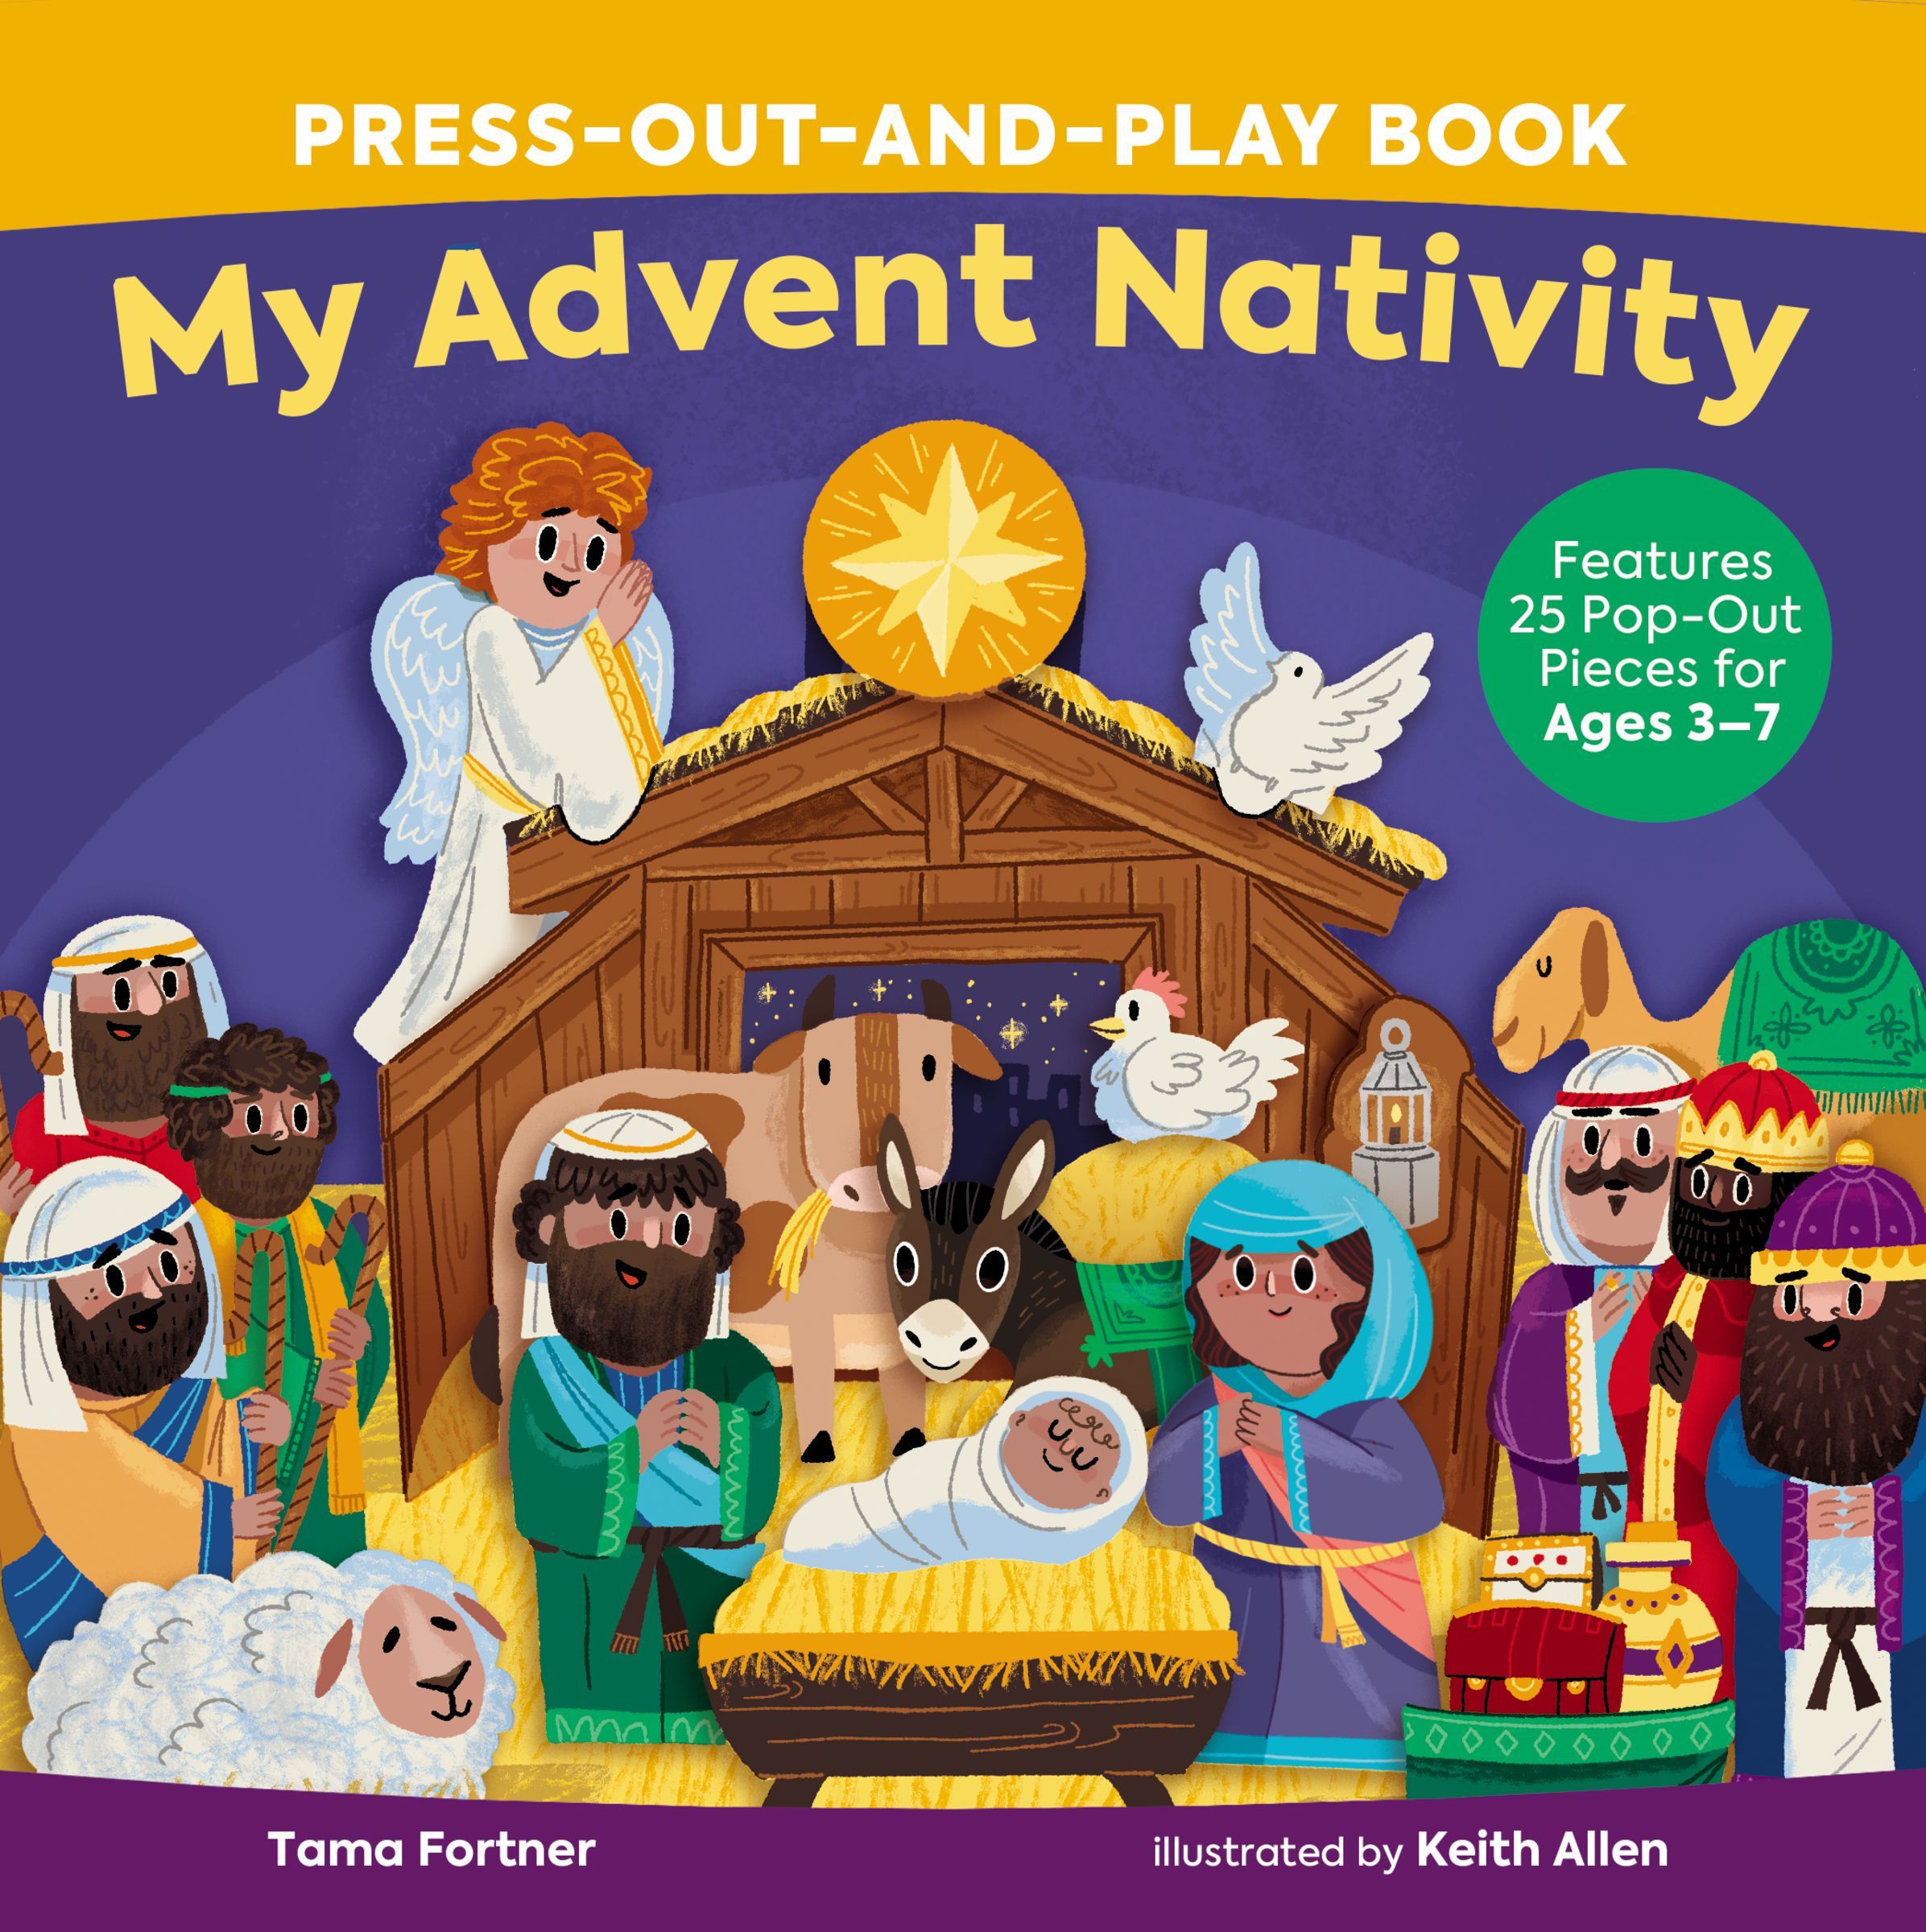 My Advent Nativity Press-Out-and-Play Book